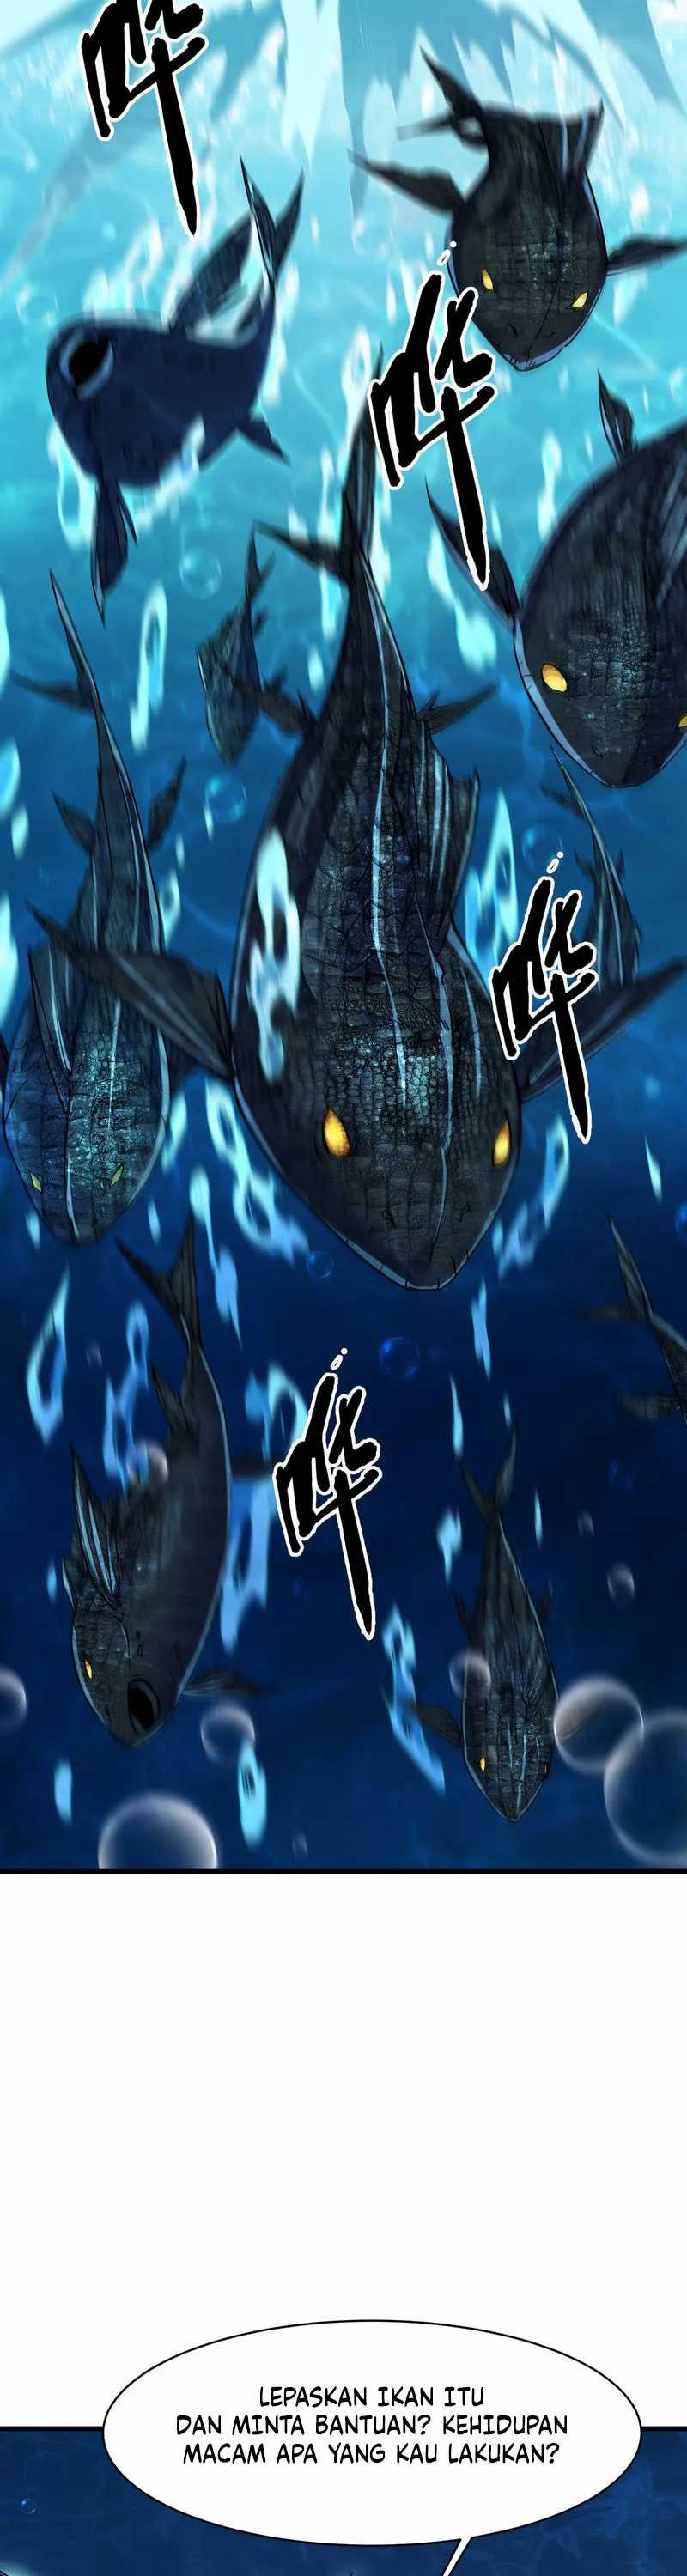 Evolution from Carp to Divine Dragon Chapter 03